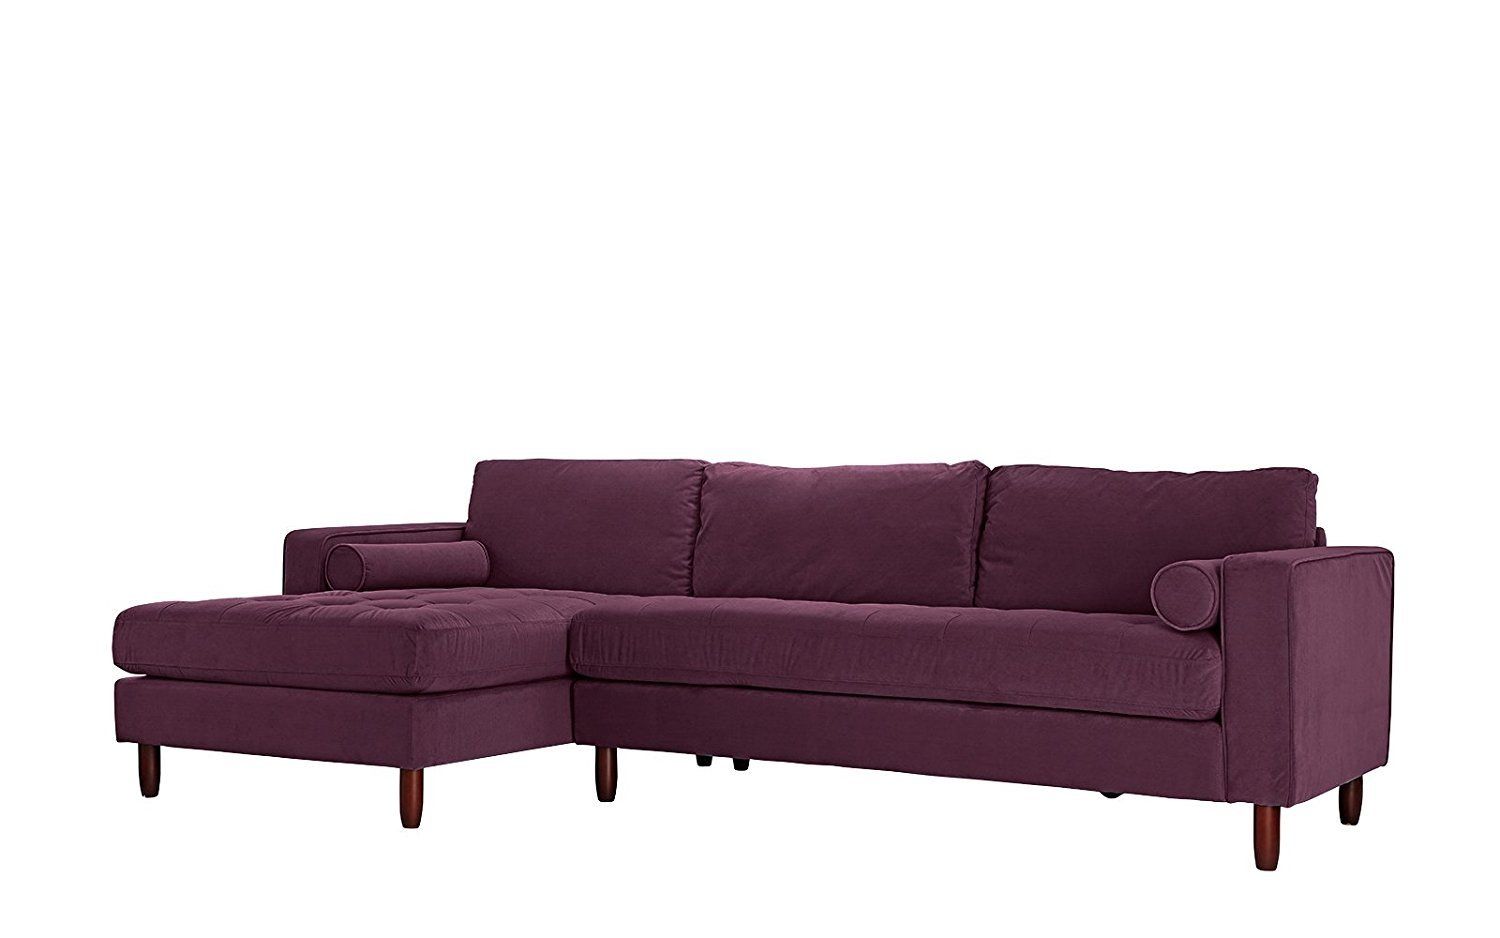 Tufted Velvet Fabric Sectional Sofa, L Shape Couch Left Intended For Florence Mid Century Modern Velvet Left Sectional Sofas (View 7 of 15)